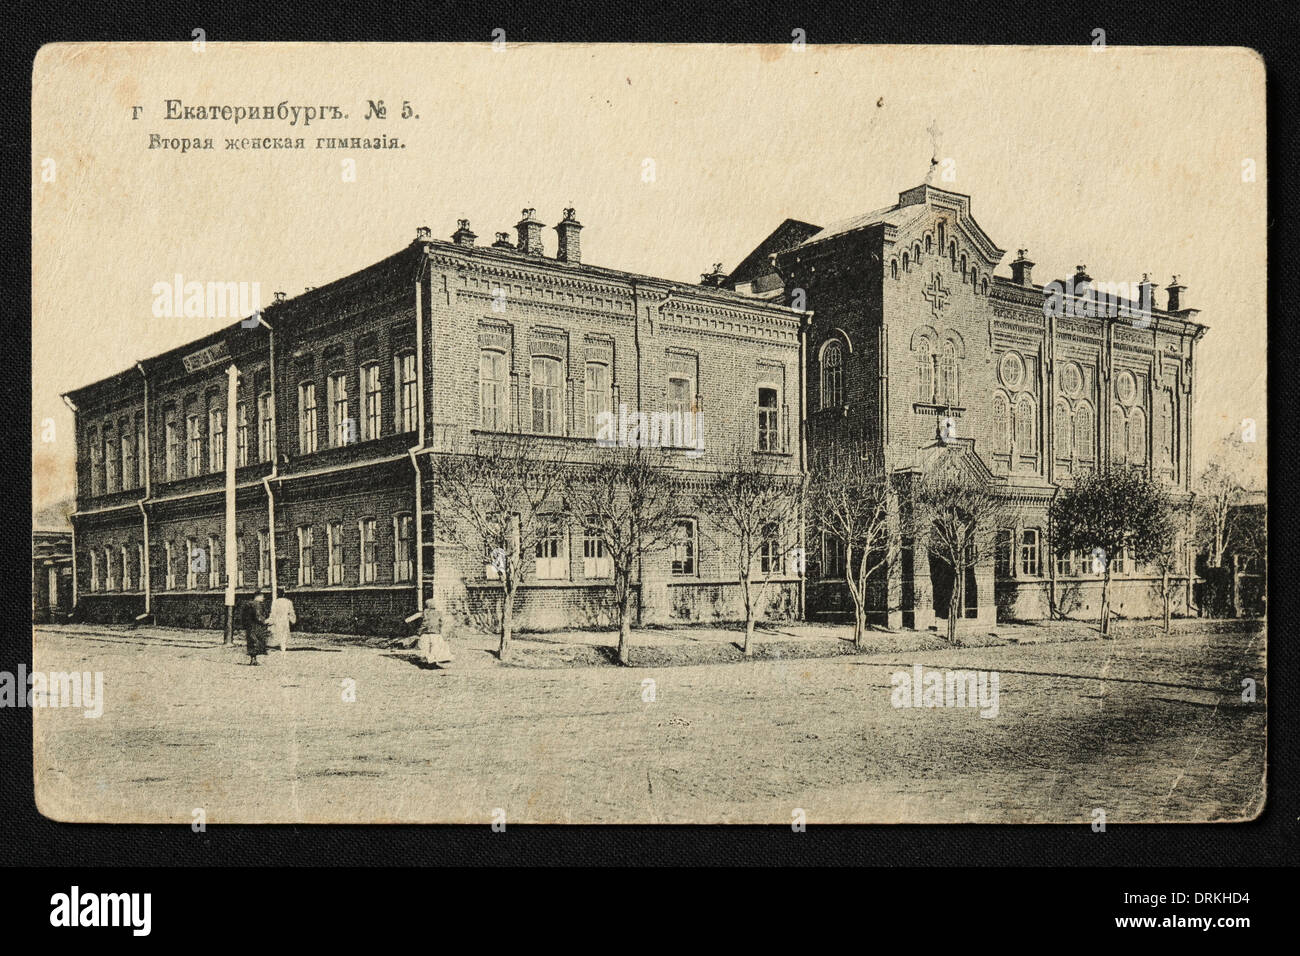 Second Women's Gymnasium in Yekaterinburg, Russian Empire. Black and white vintage photograph by an unknown photographer dated from the beginning of the 20th century issued in the Russian vintage postcard published by A.S. Suvorin, Yekaterinburg. Text in Russian: Yekaterinburg. Second Women's Gymnasium. Courtesy of the Azoor Postcard Collection. Stock Photo